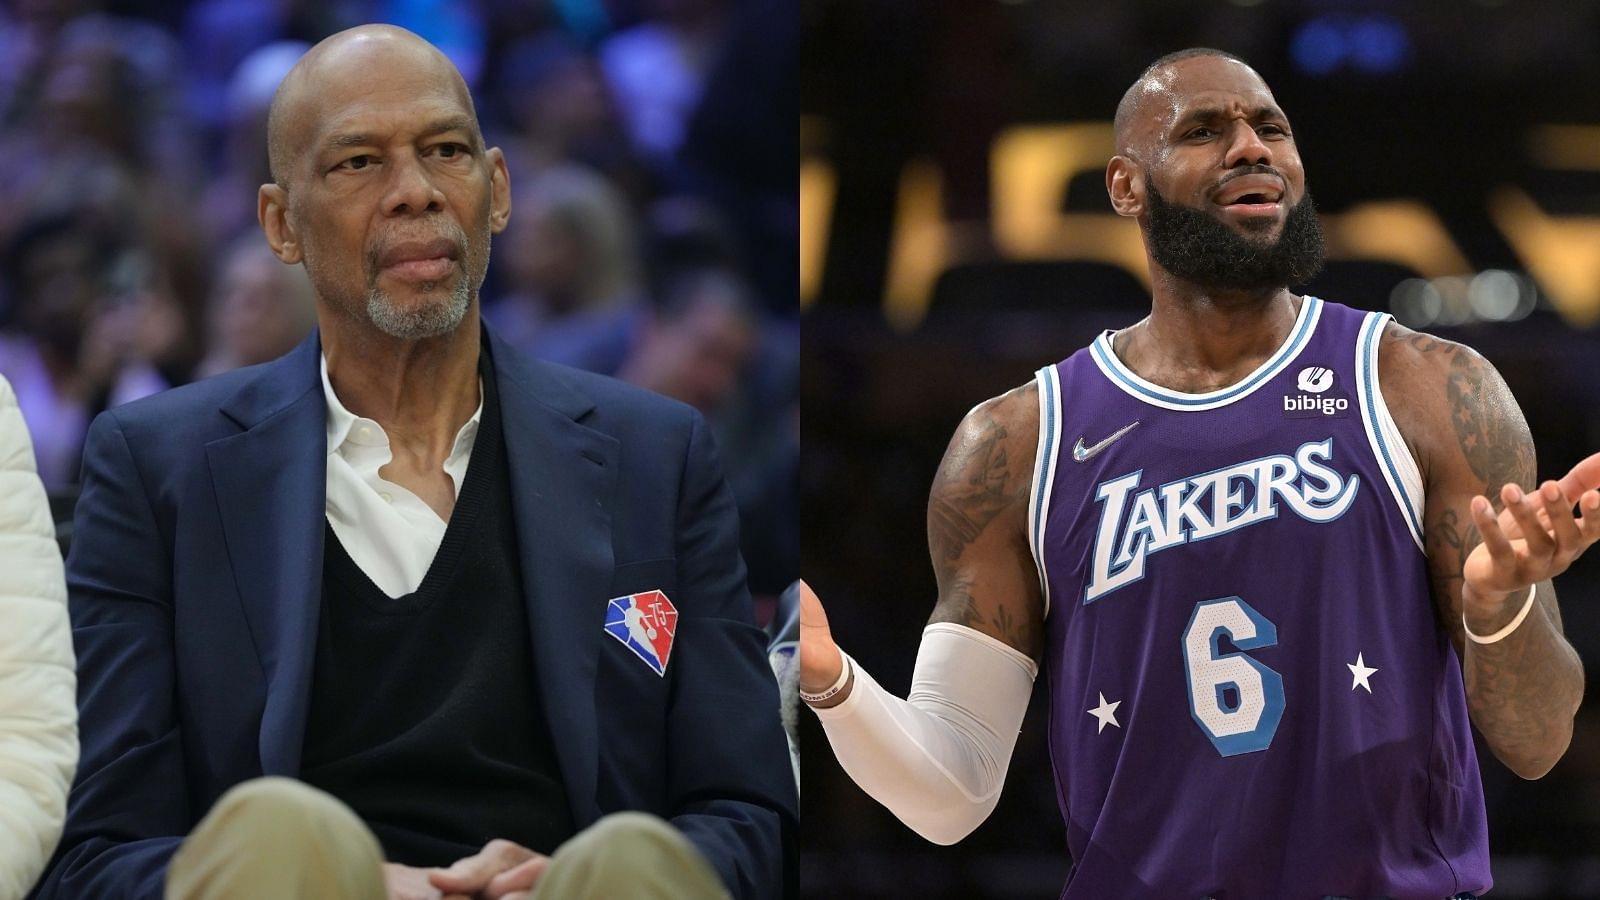 "Some of the things LeBron James has said and done are really beneath him": Kareem Abdul-Jabbar calls out Lakers MVP for 'standing on both sides of the fence'